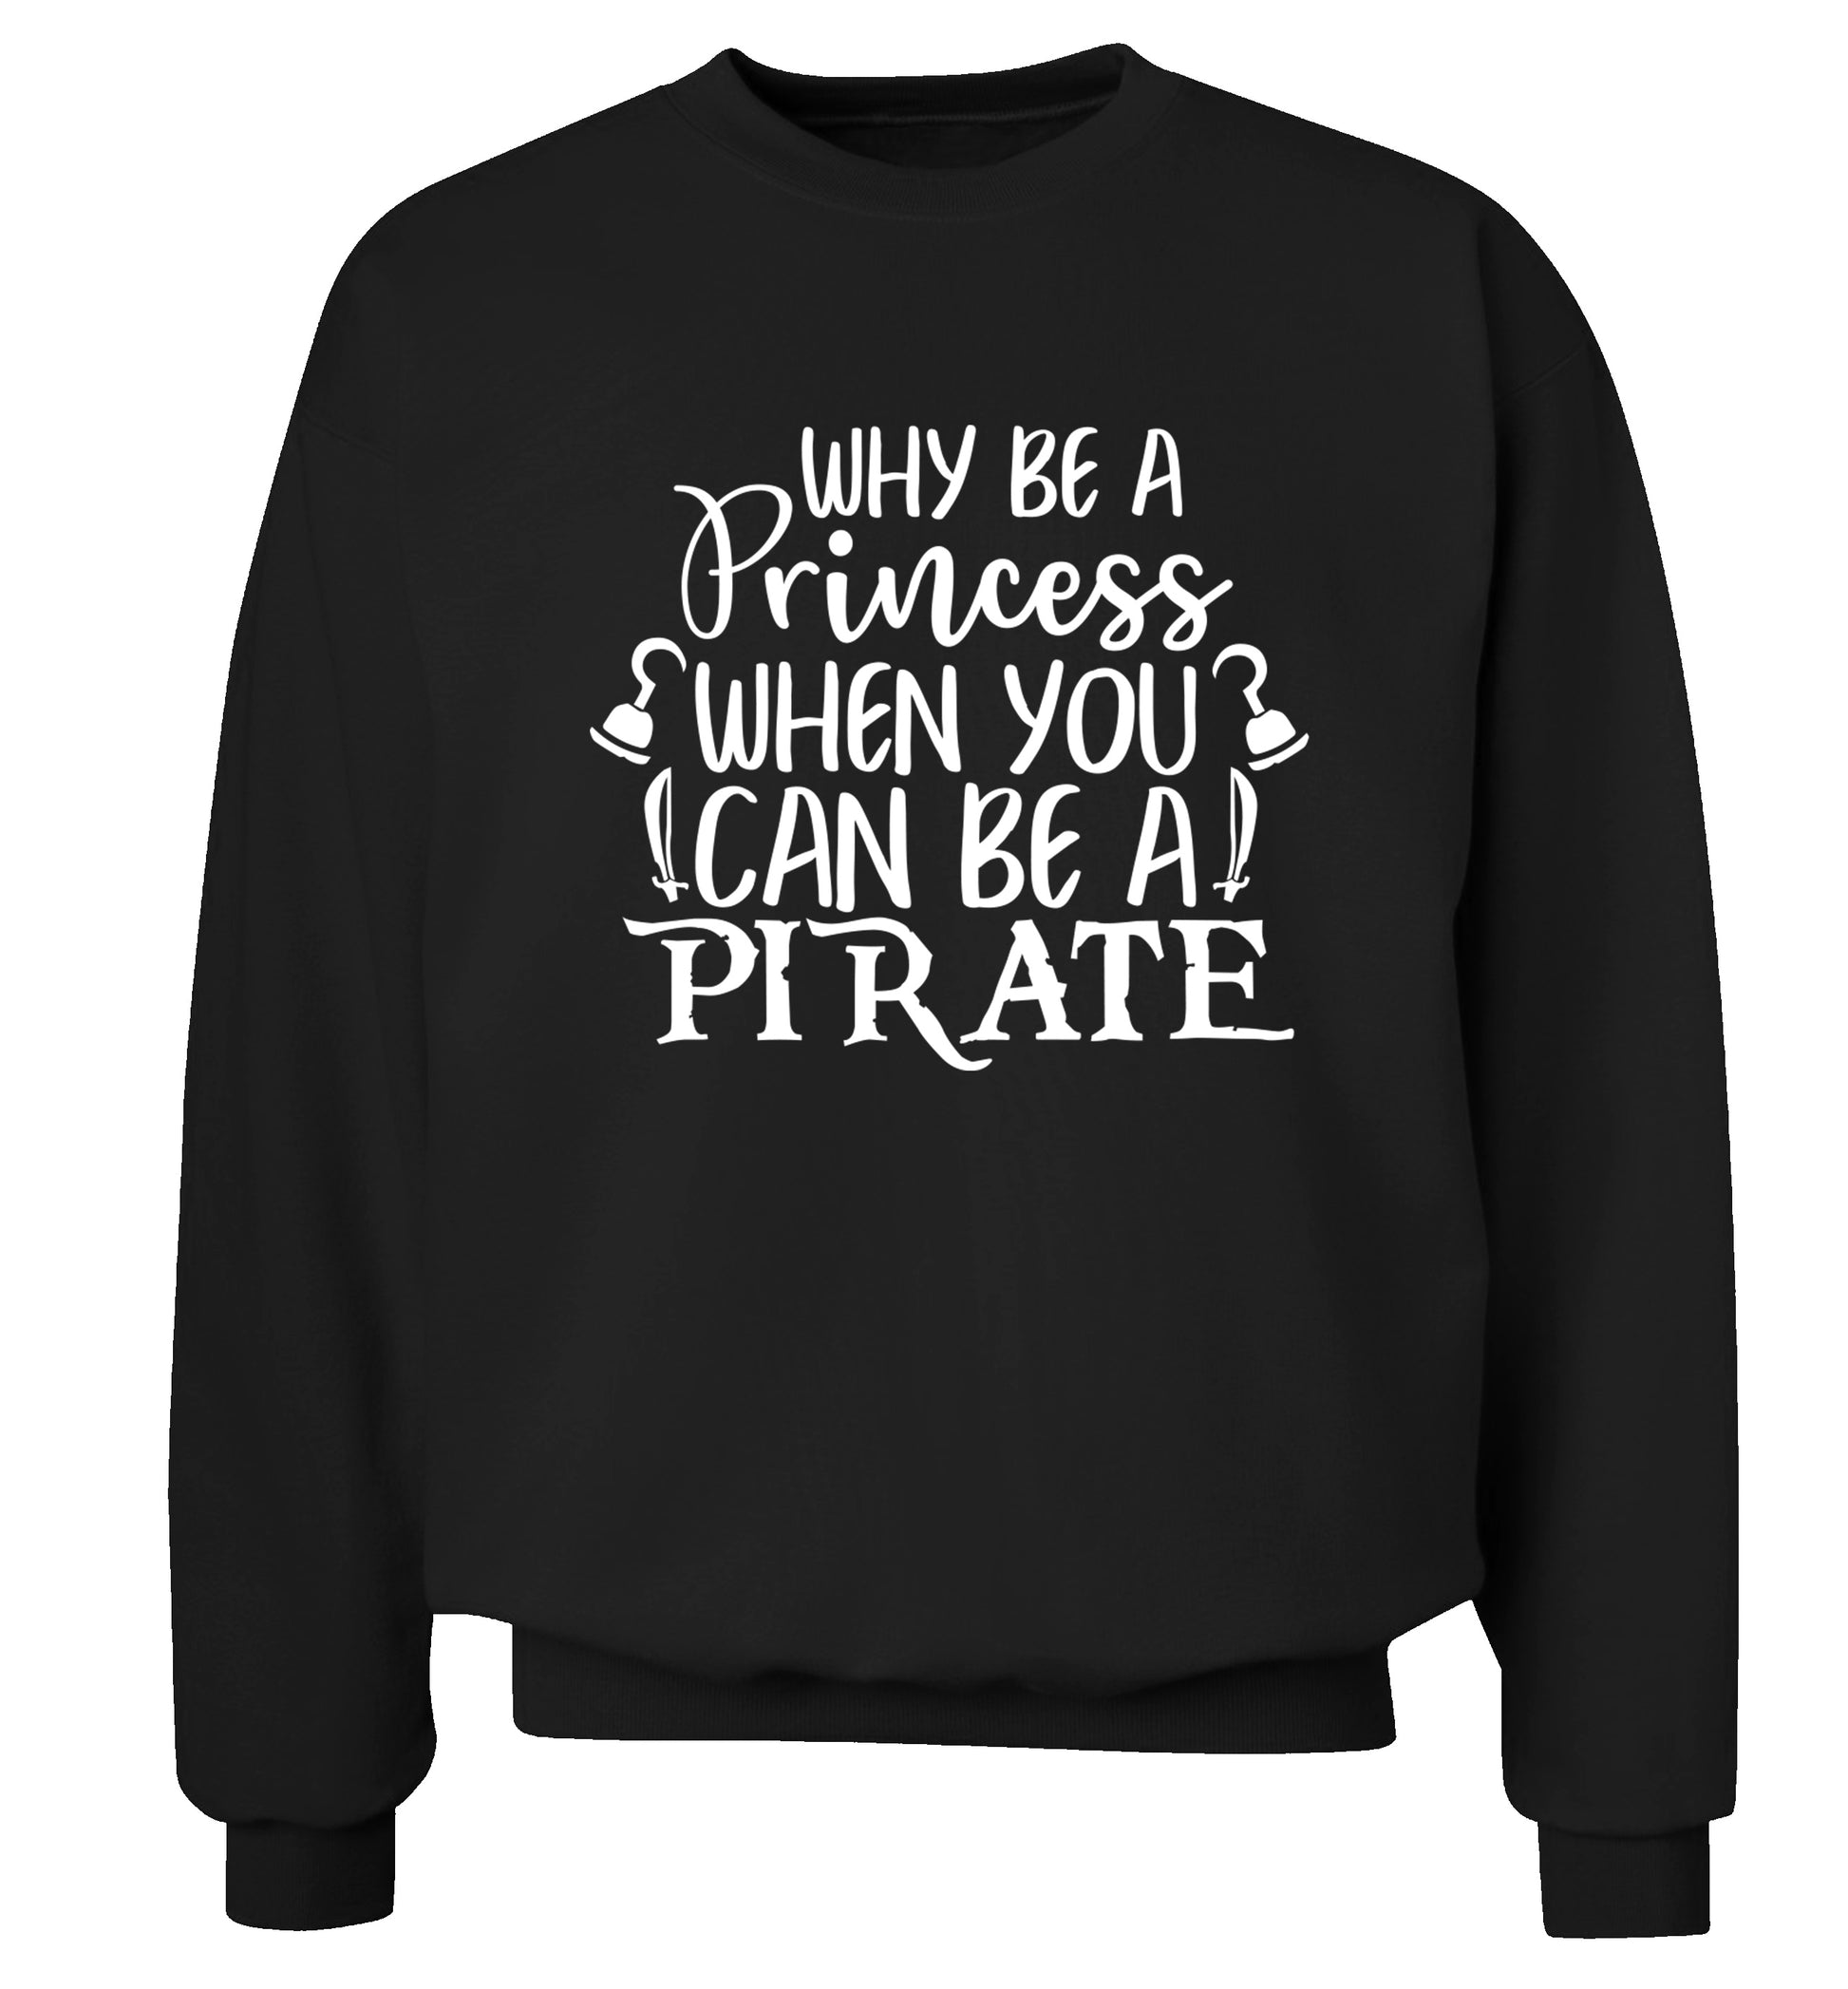 Why be a princess when you can be a pirate? Adult's unisex black Sweater 2XL